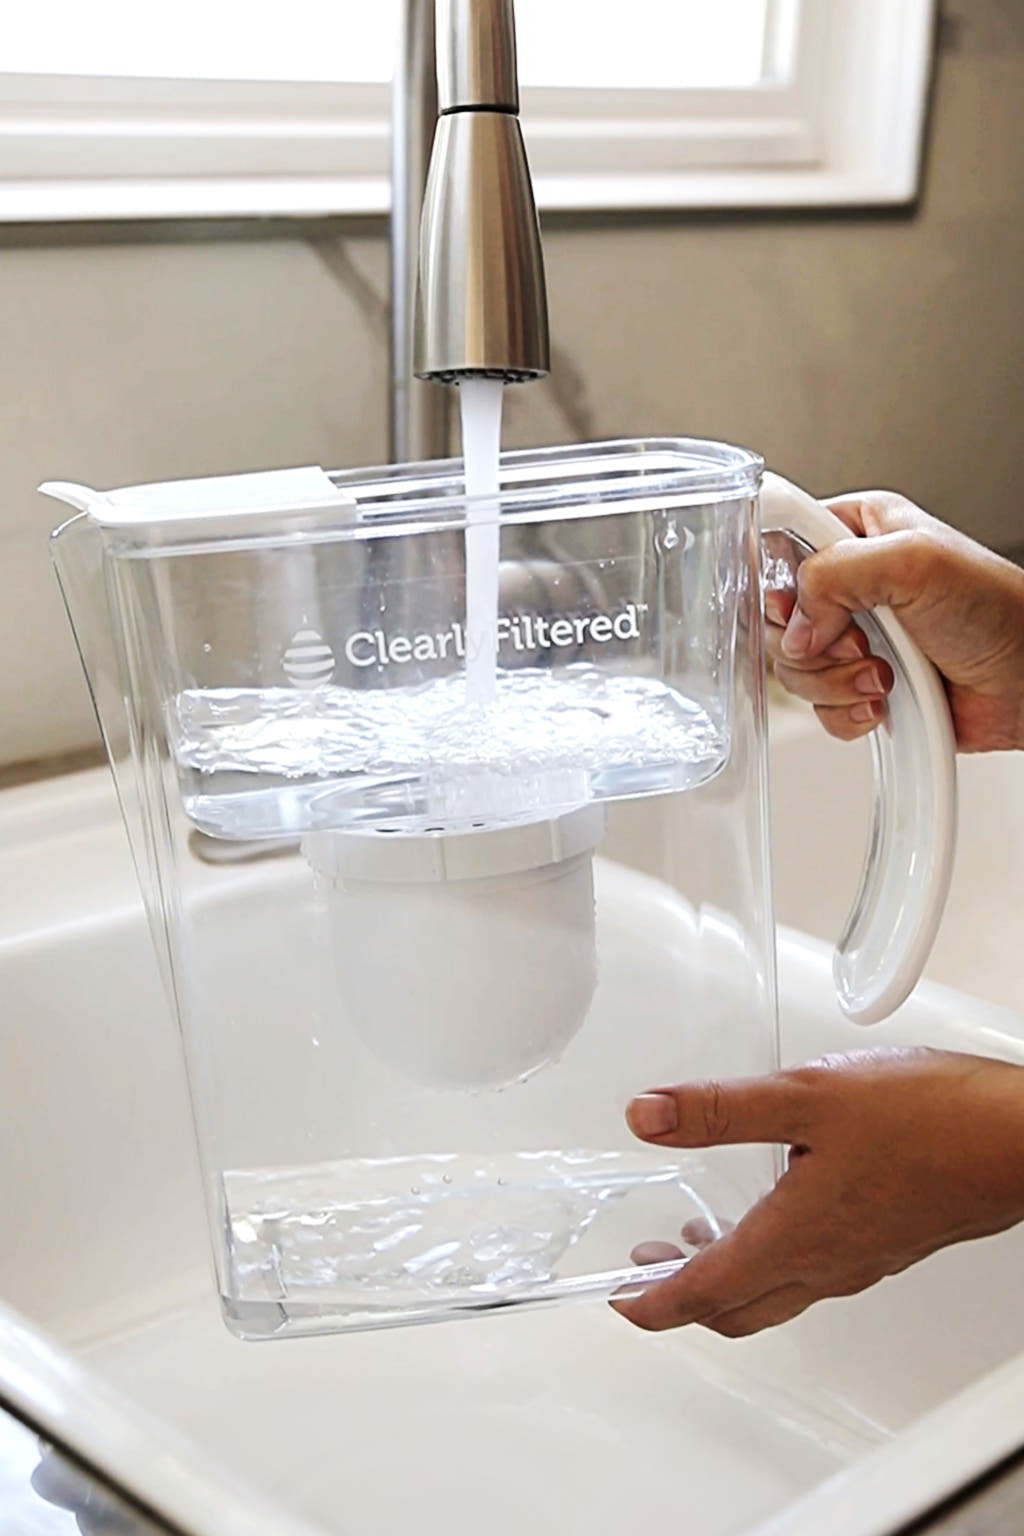 There's new hope for eliminating PFAS from tap water: pitcher filters